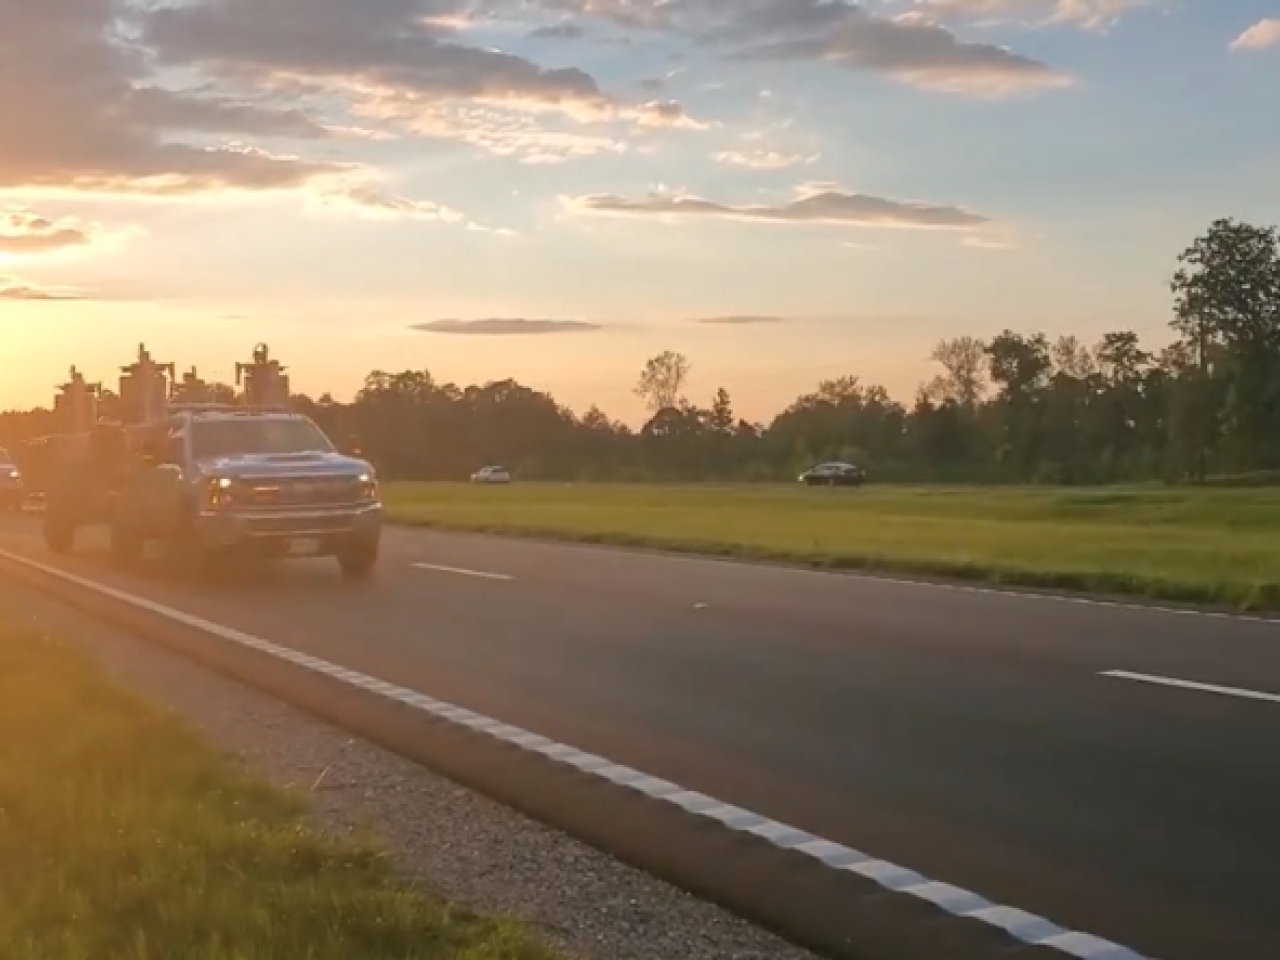 Truck on the highway with a sunset behind it